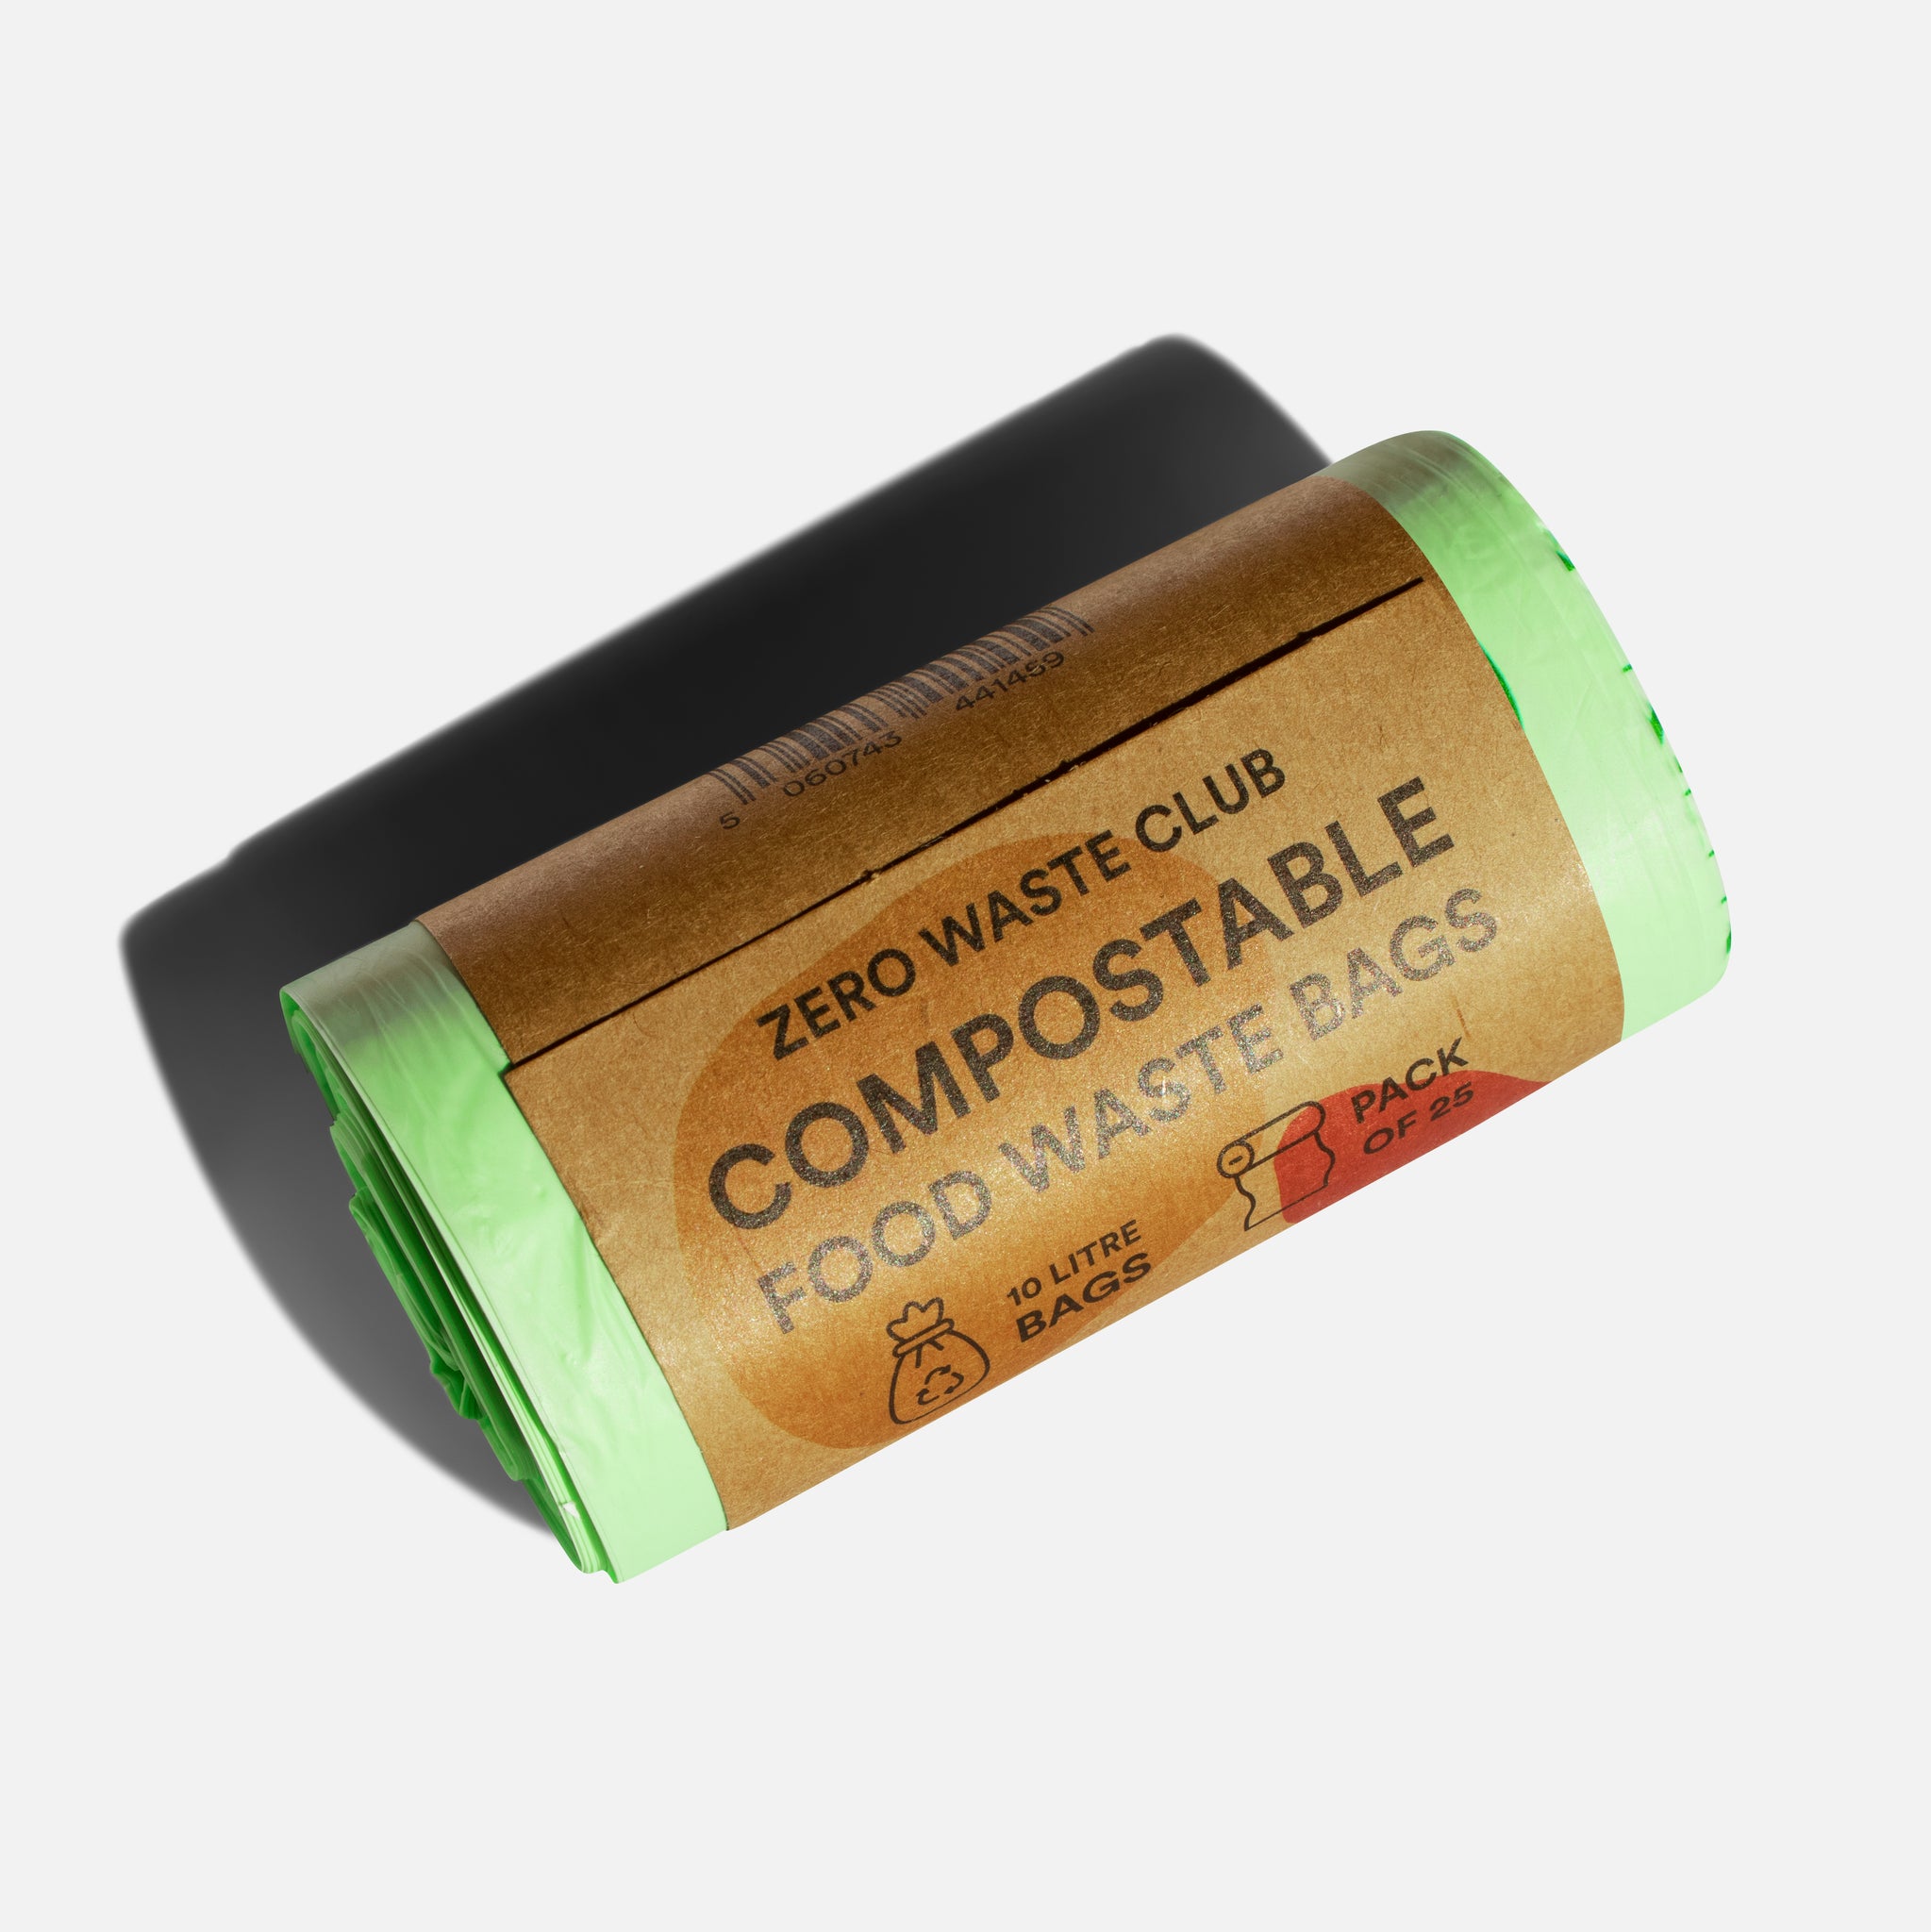 Compostable Bin Bags - Pack of 25 - 10 Litre Bags